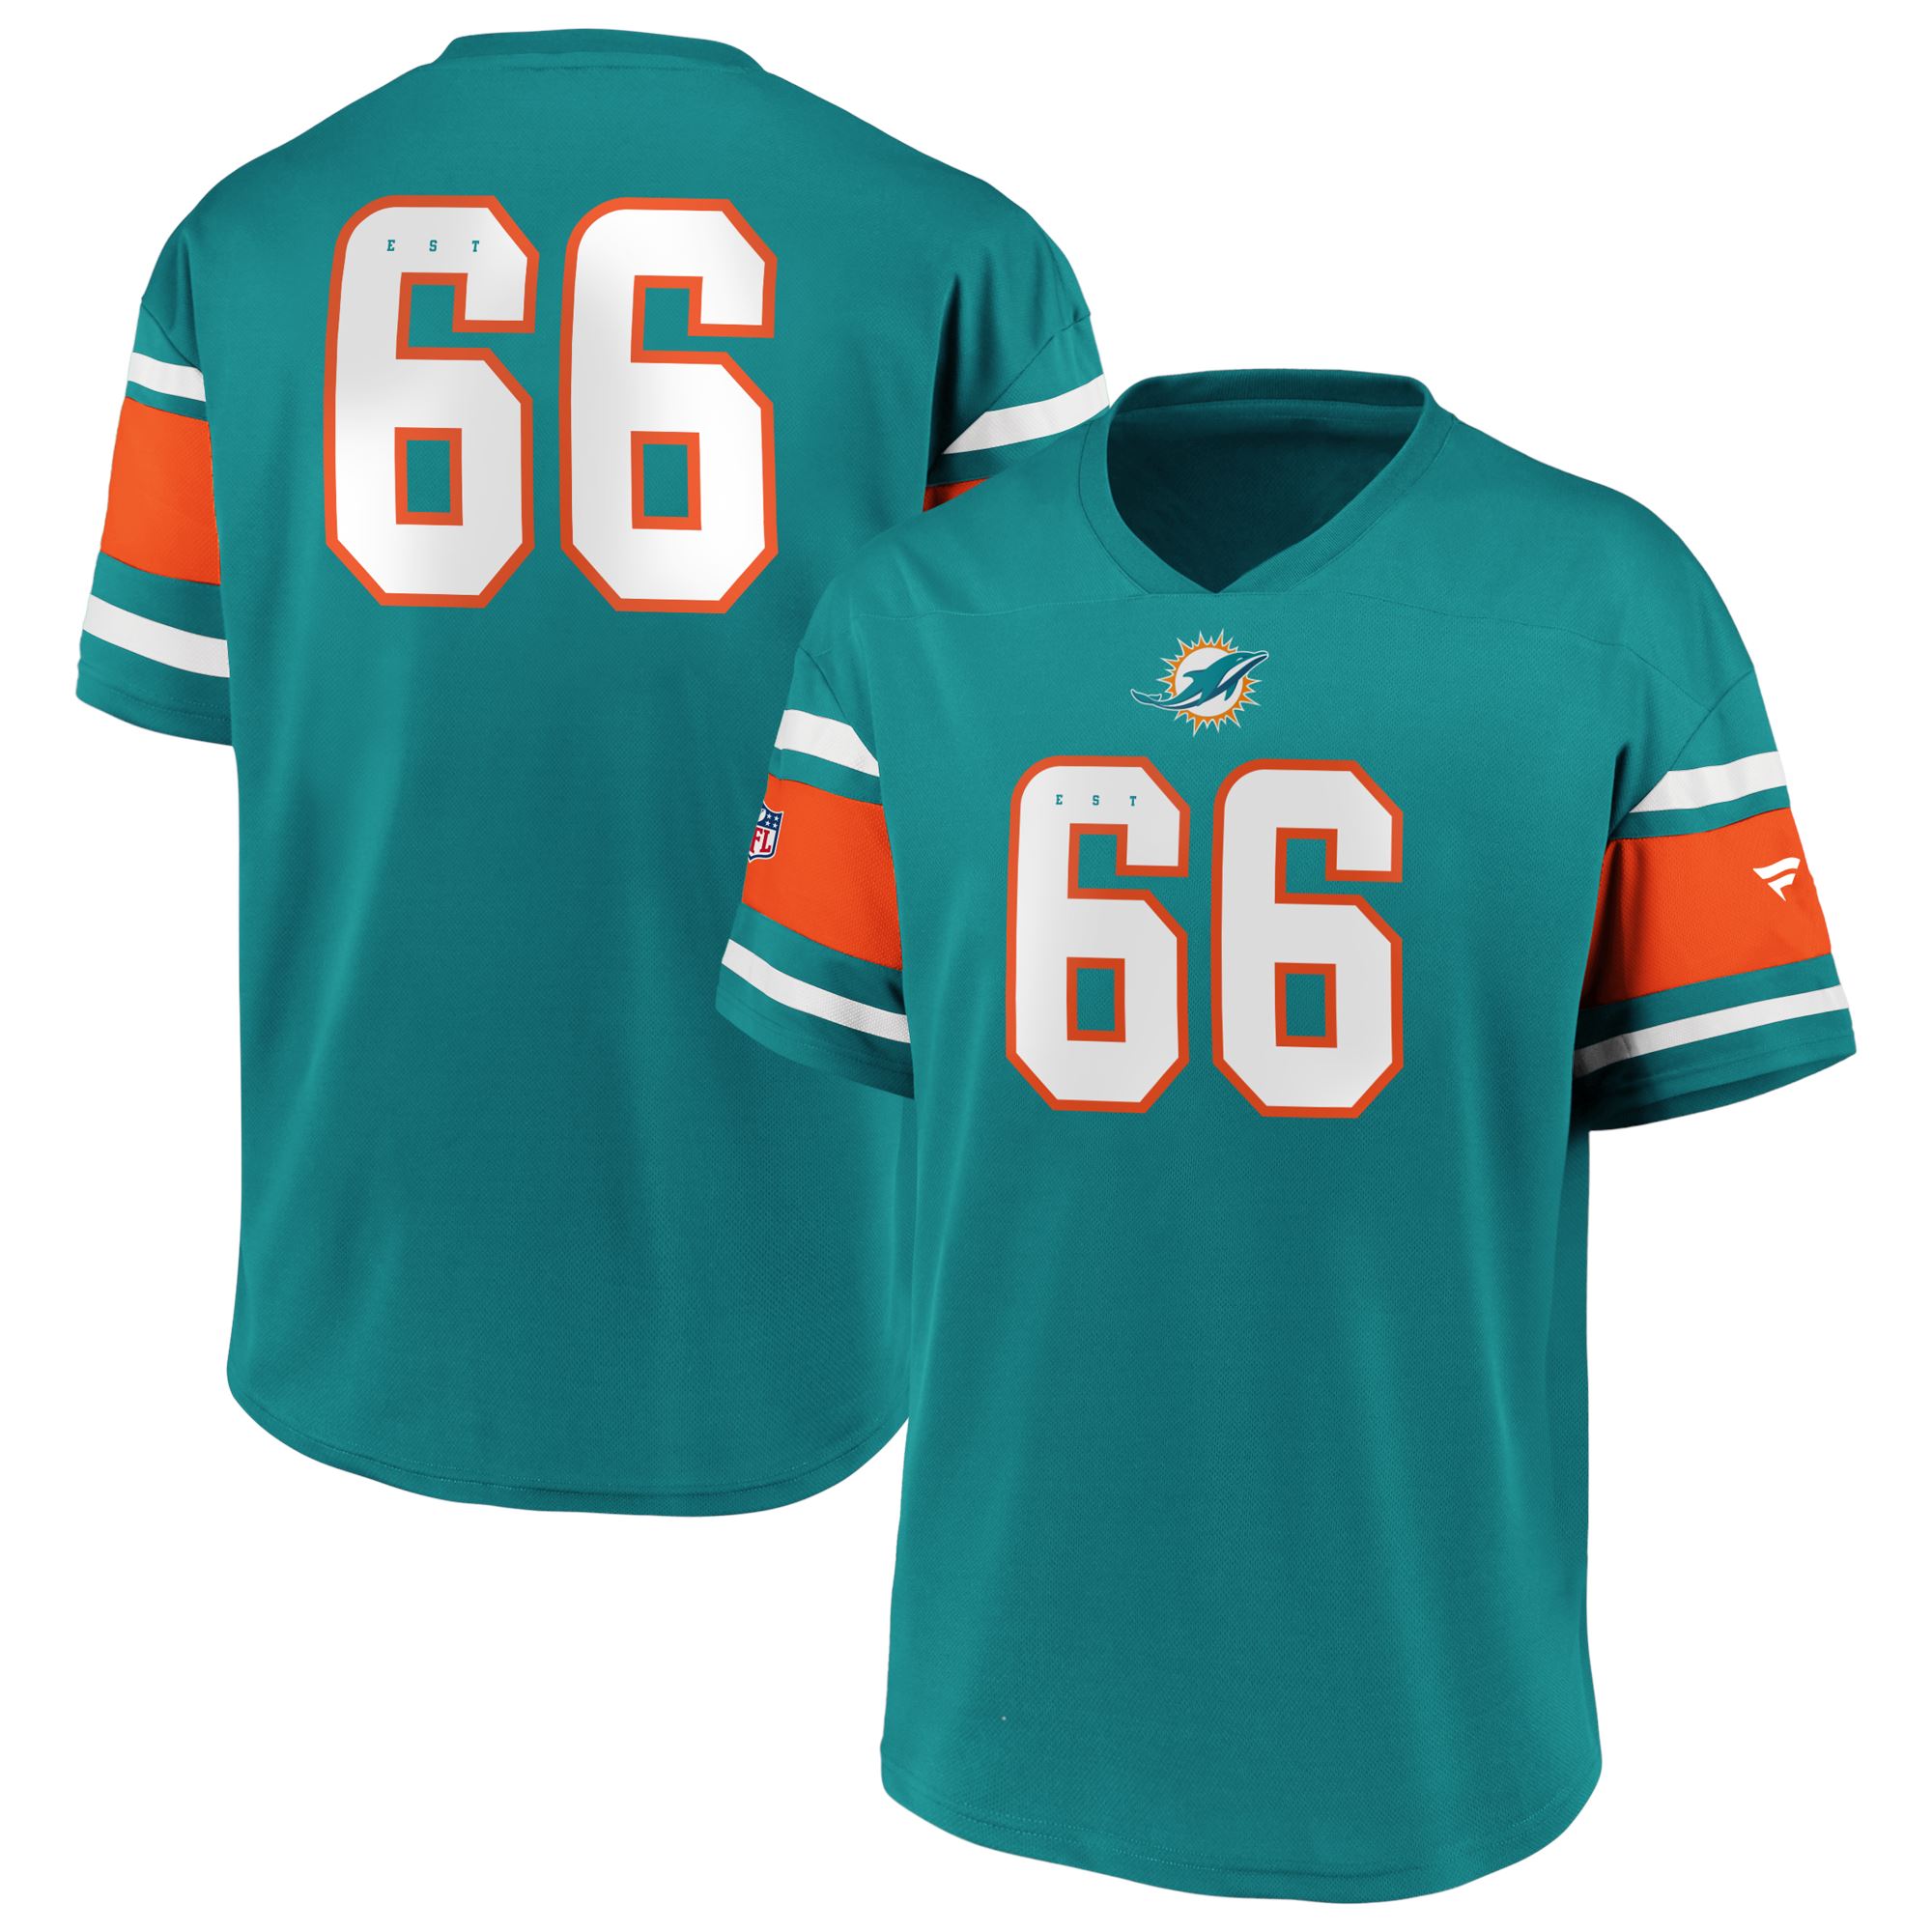 Miami Dolphins NFL Supporters Jersey Fanatics